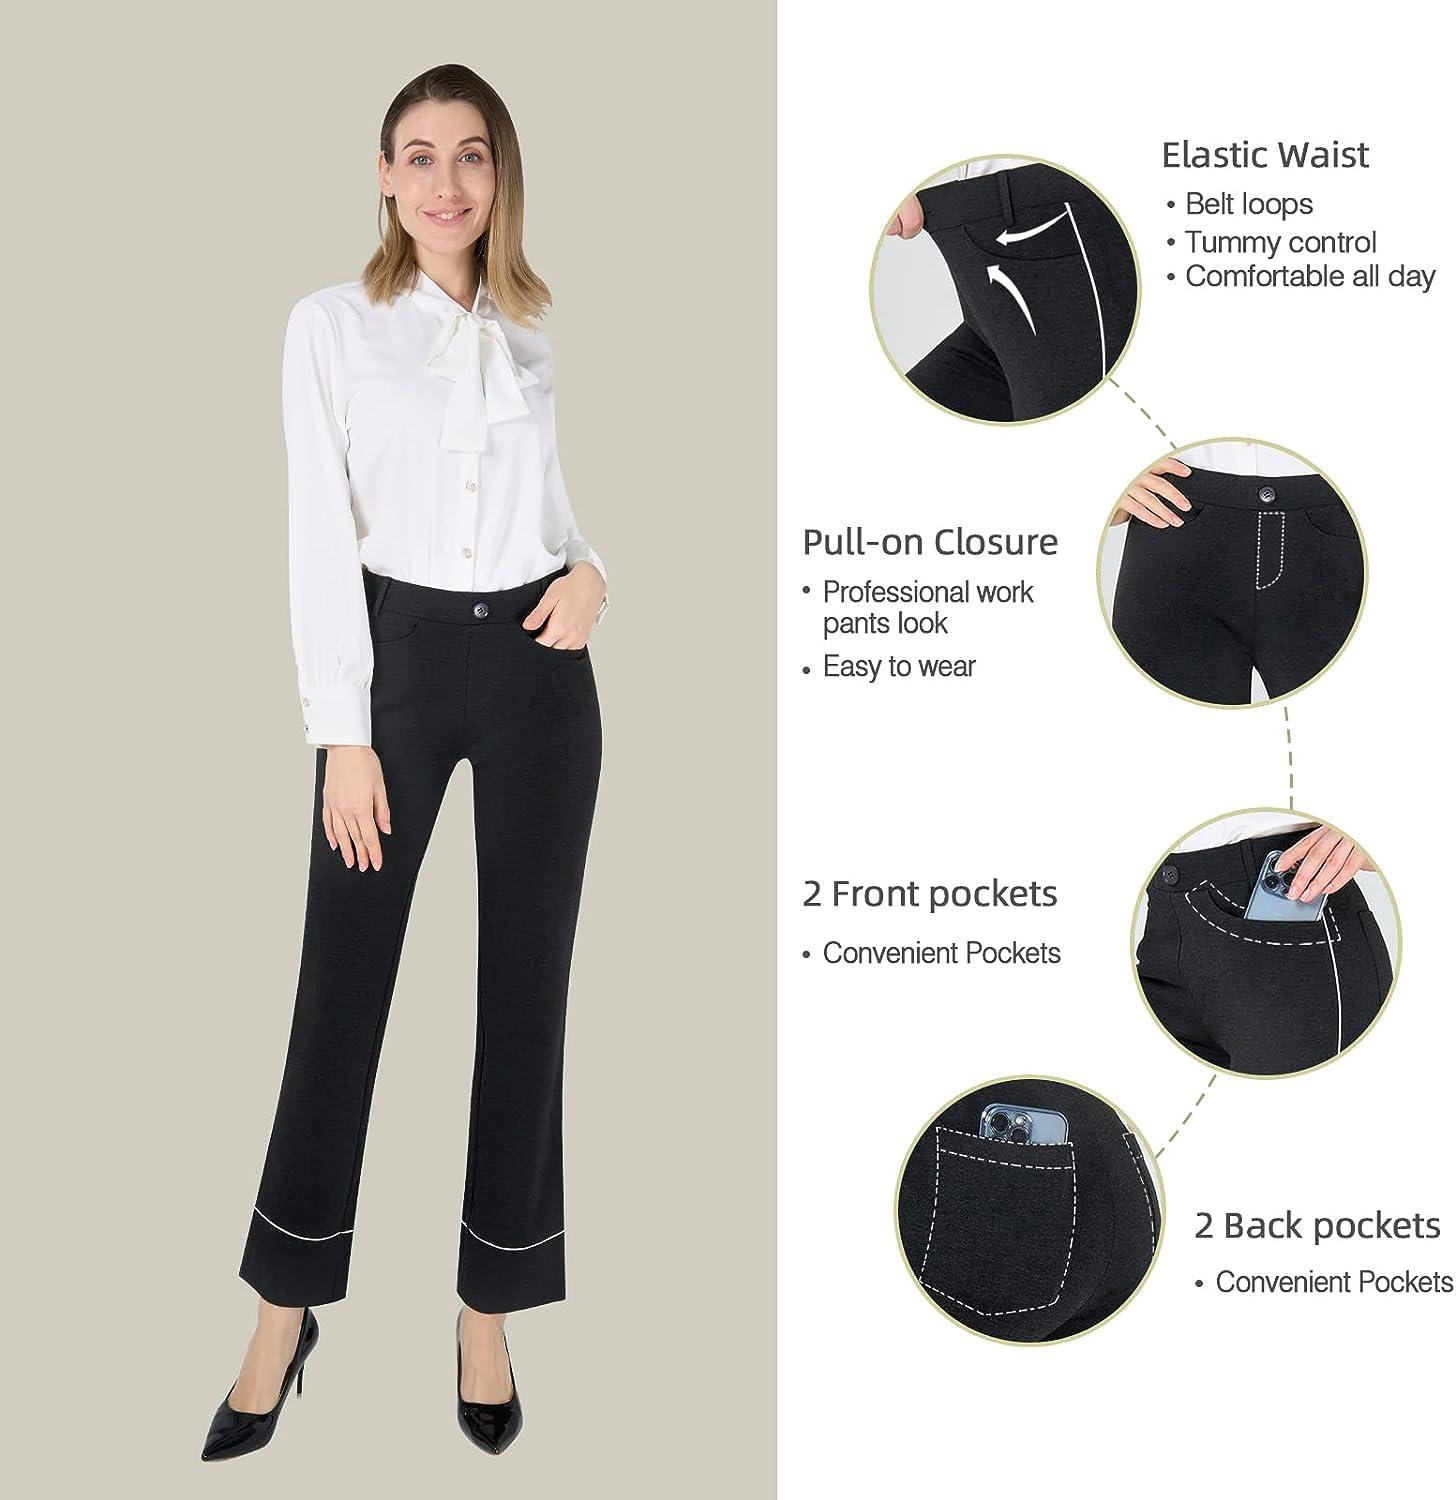 UUE Women's Dress Pants with Pockets Business Casual Straight Leg